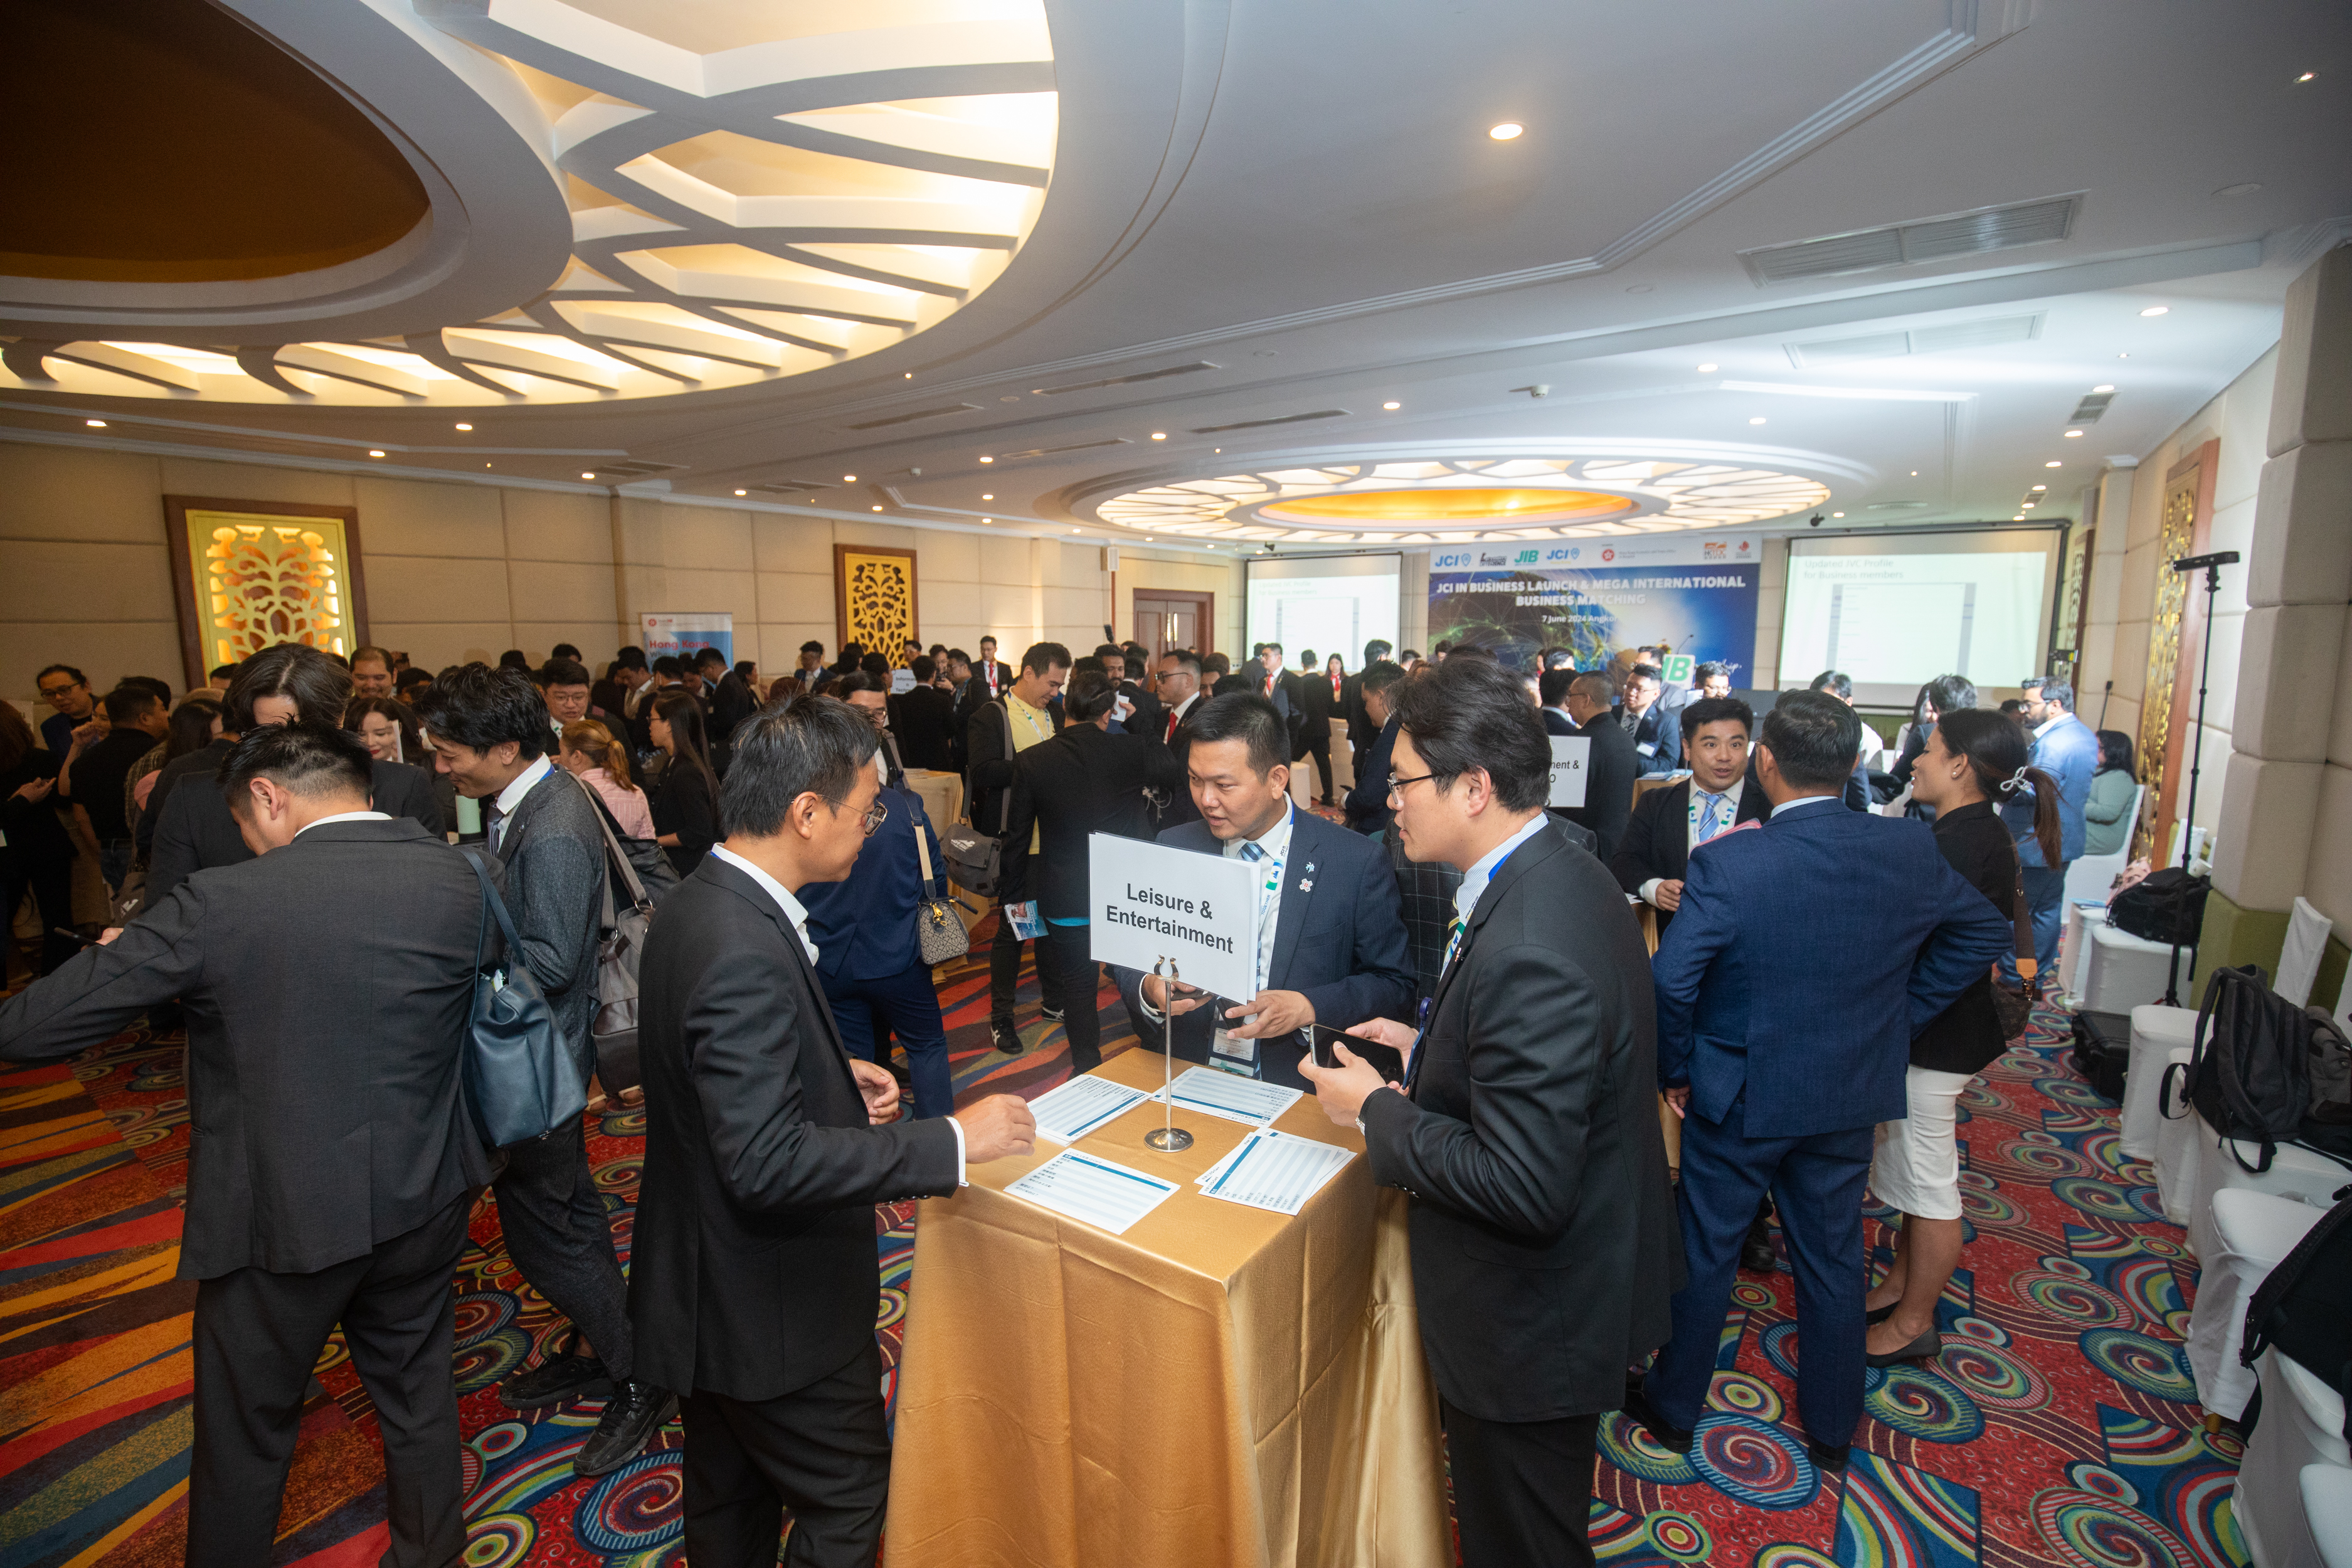 The business exchange event attracted more than 400 business representatives from nearly 30 different industries in different regions of the Asia-Pacific region.